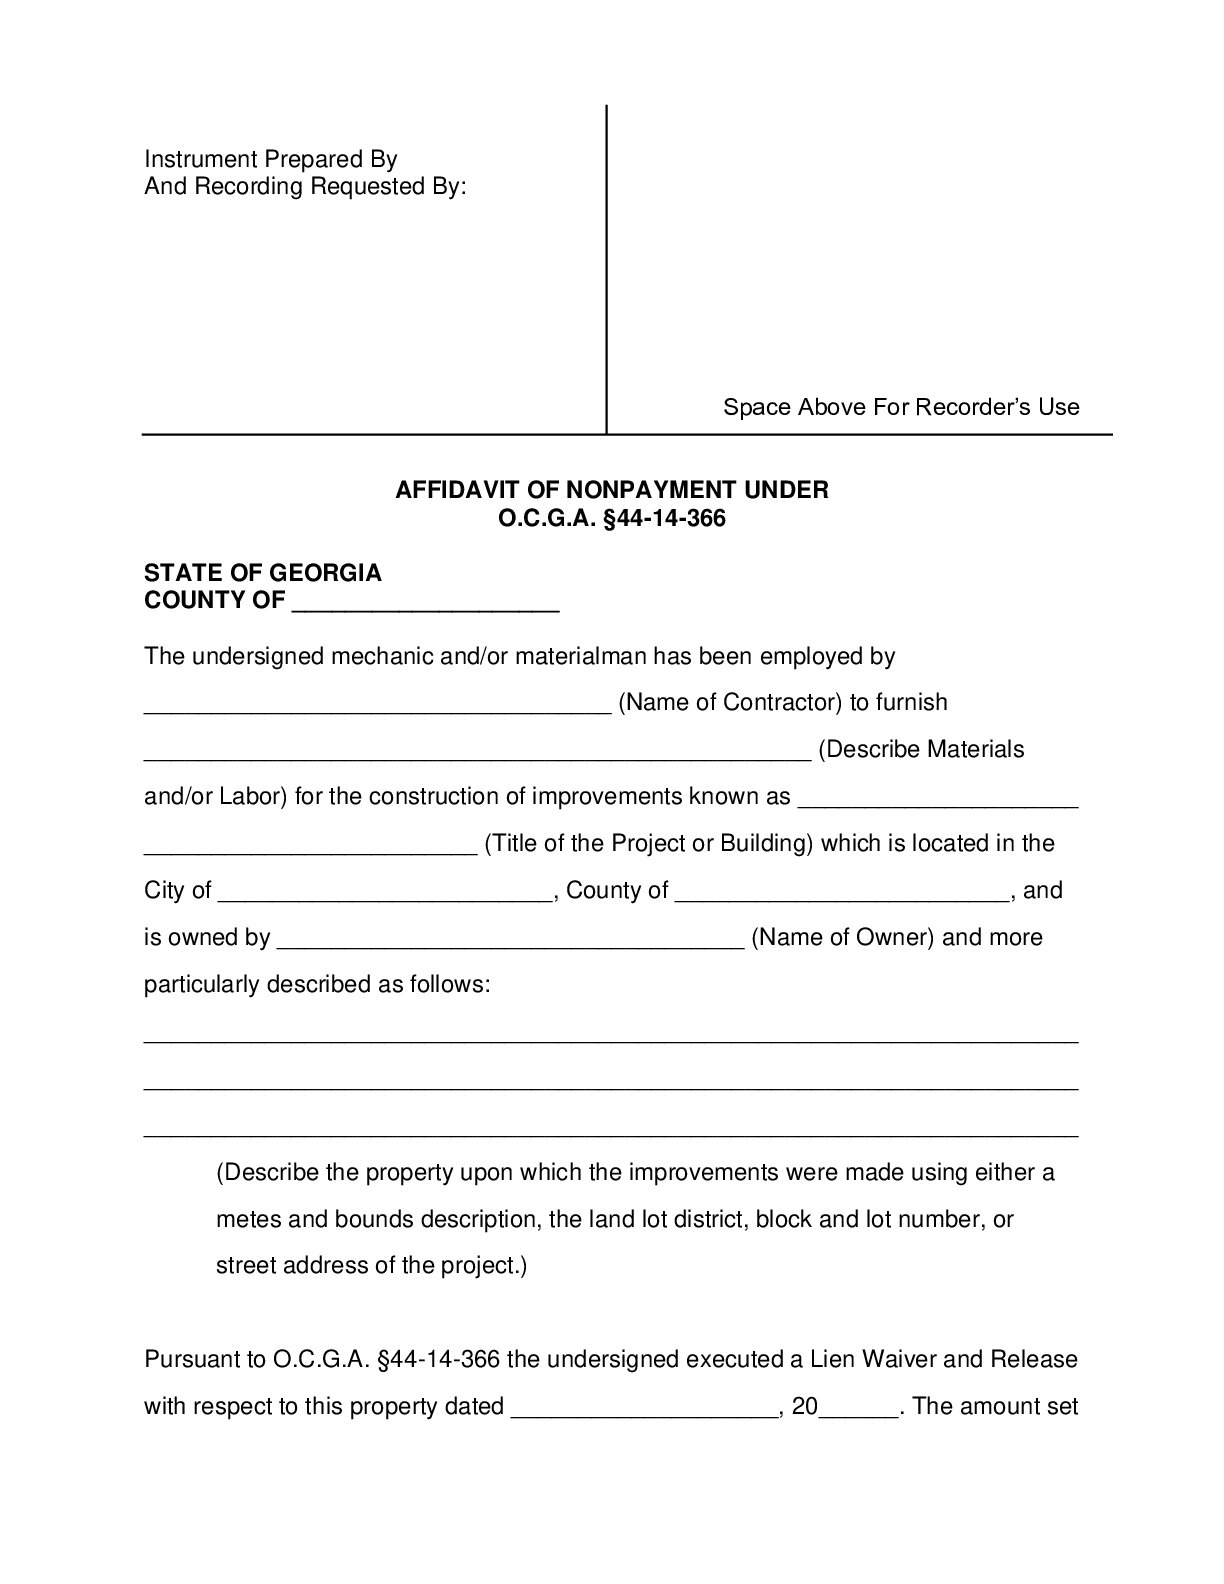 Georgia Affidavit of Non-Payment Form - free from